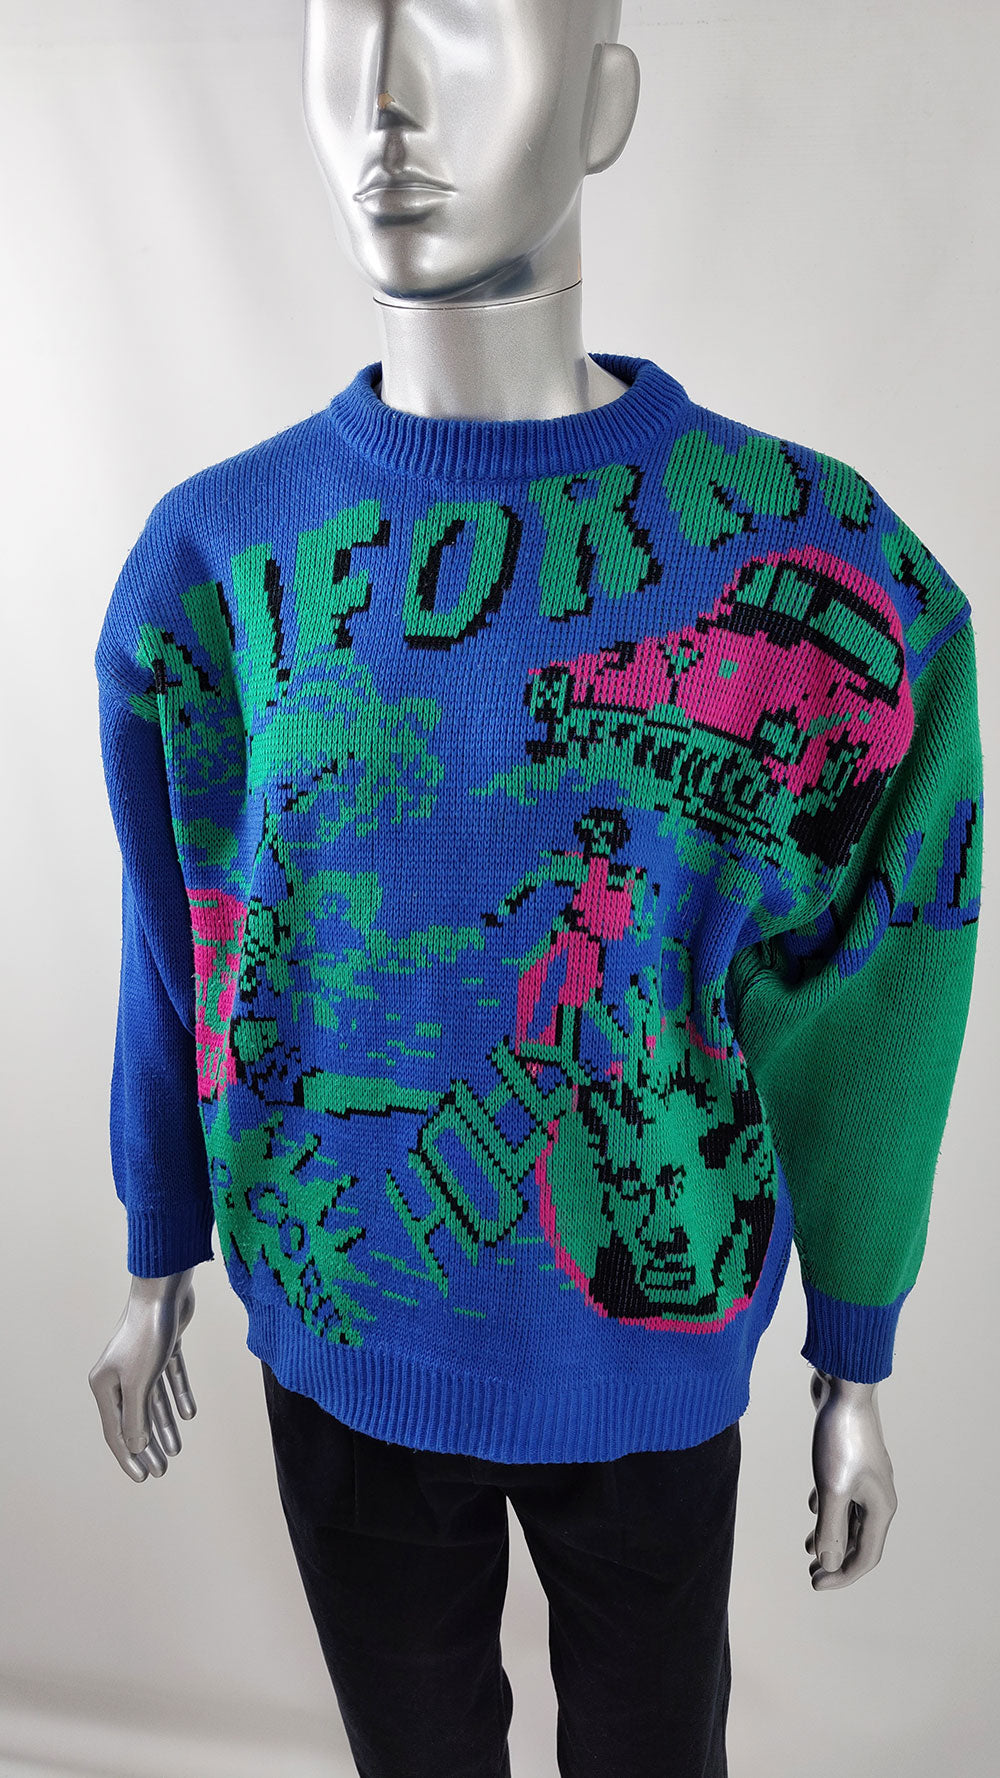 A vintage 80s mens sweater in a trippy blue and green knit acrylic and mohair fabric.